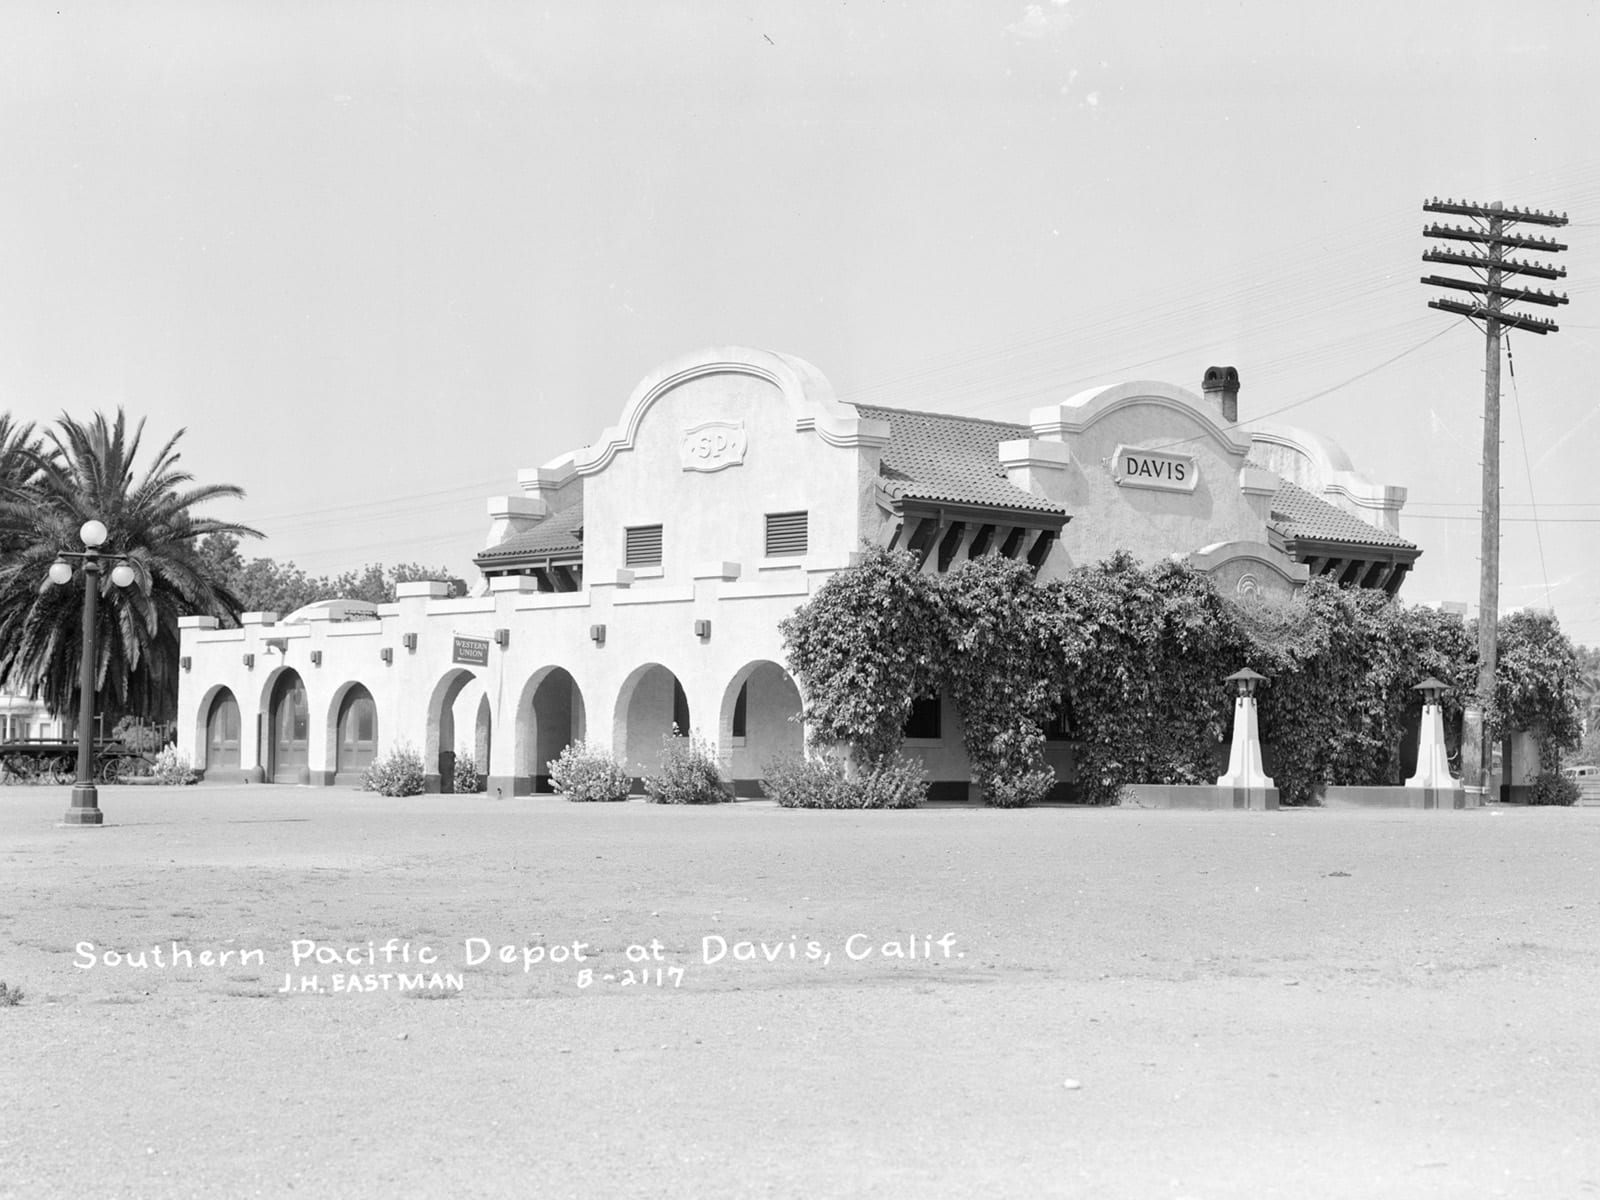 Southern Pacific Depot, 1944